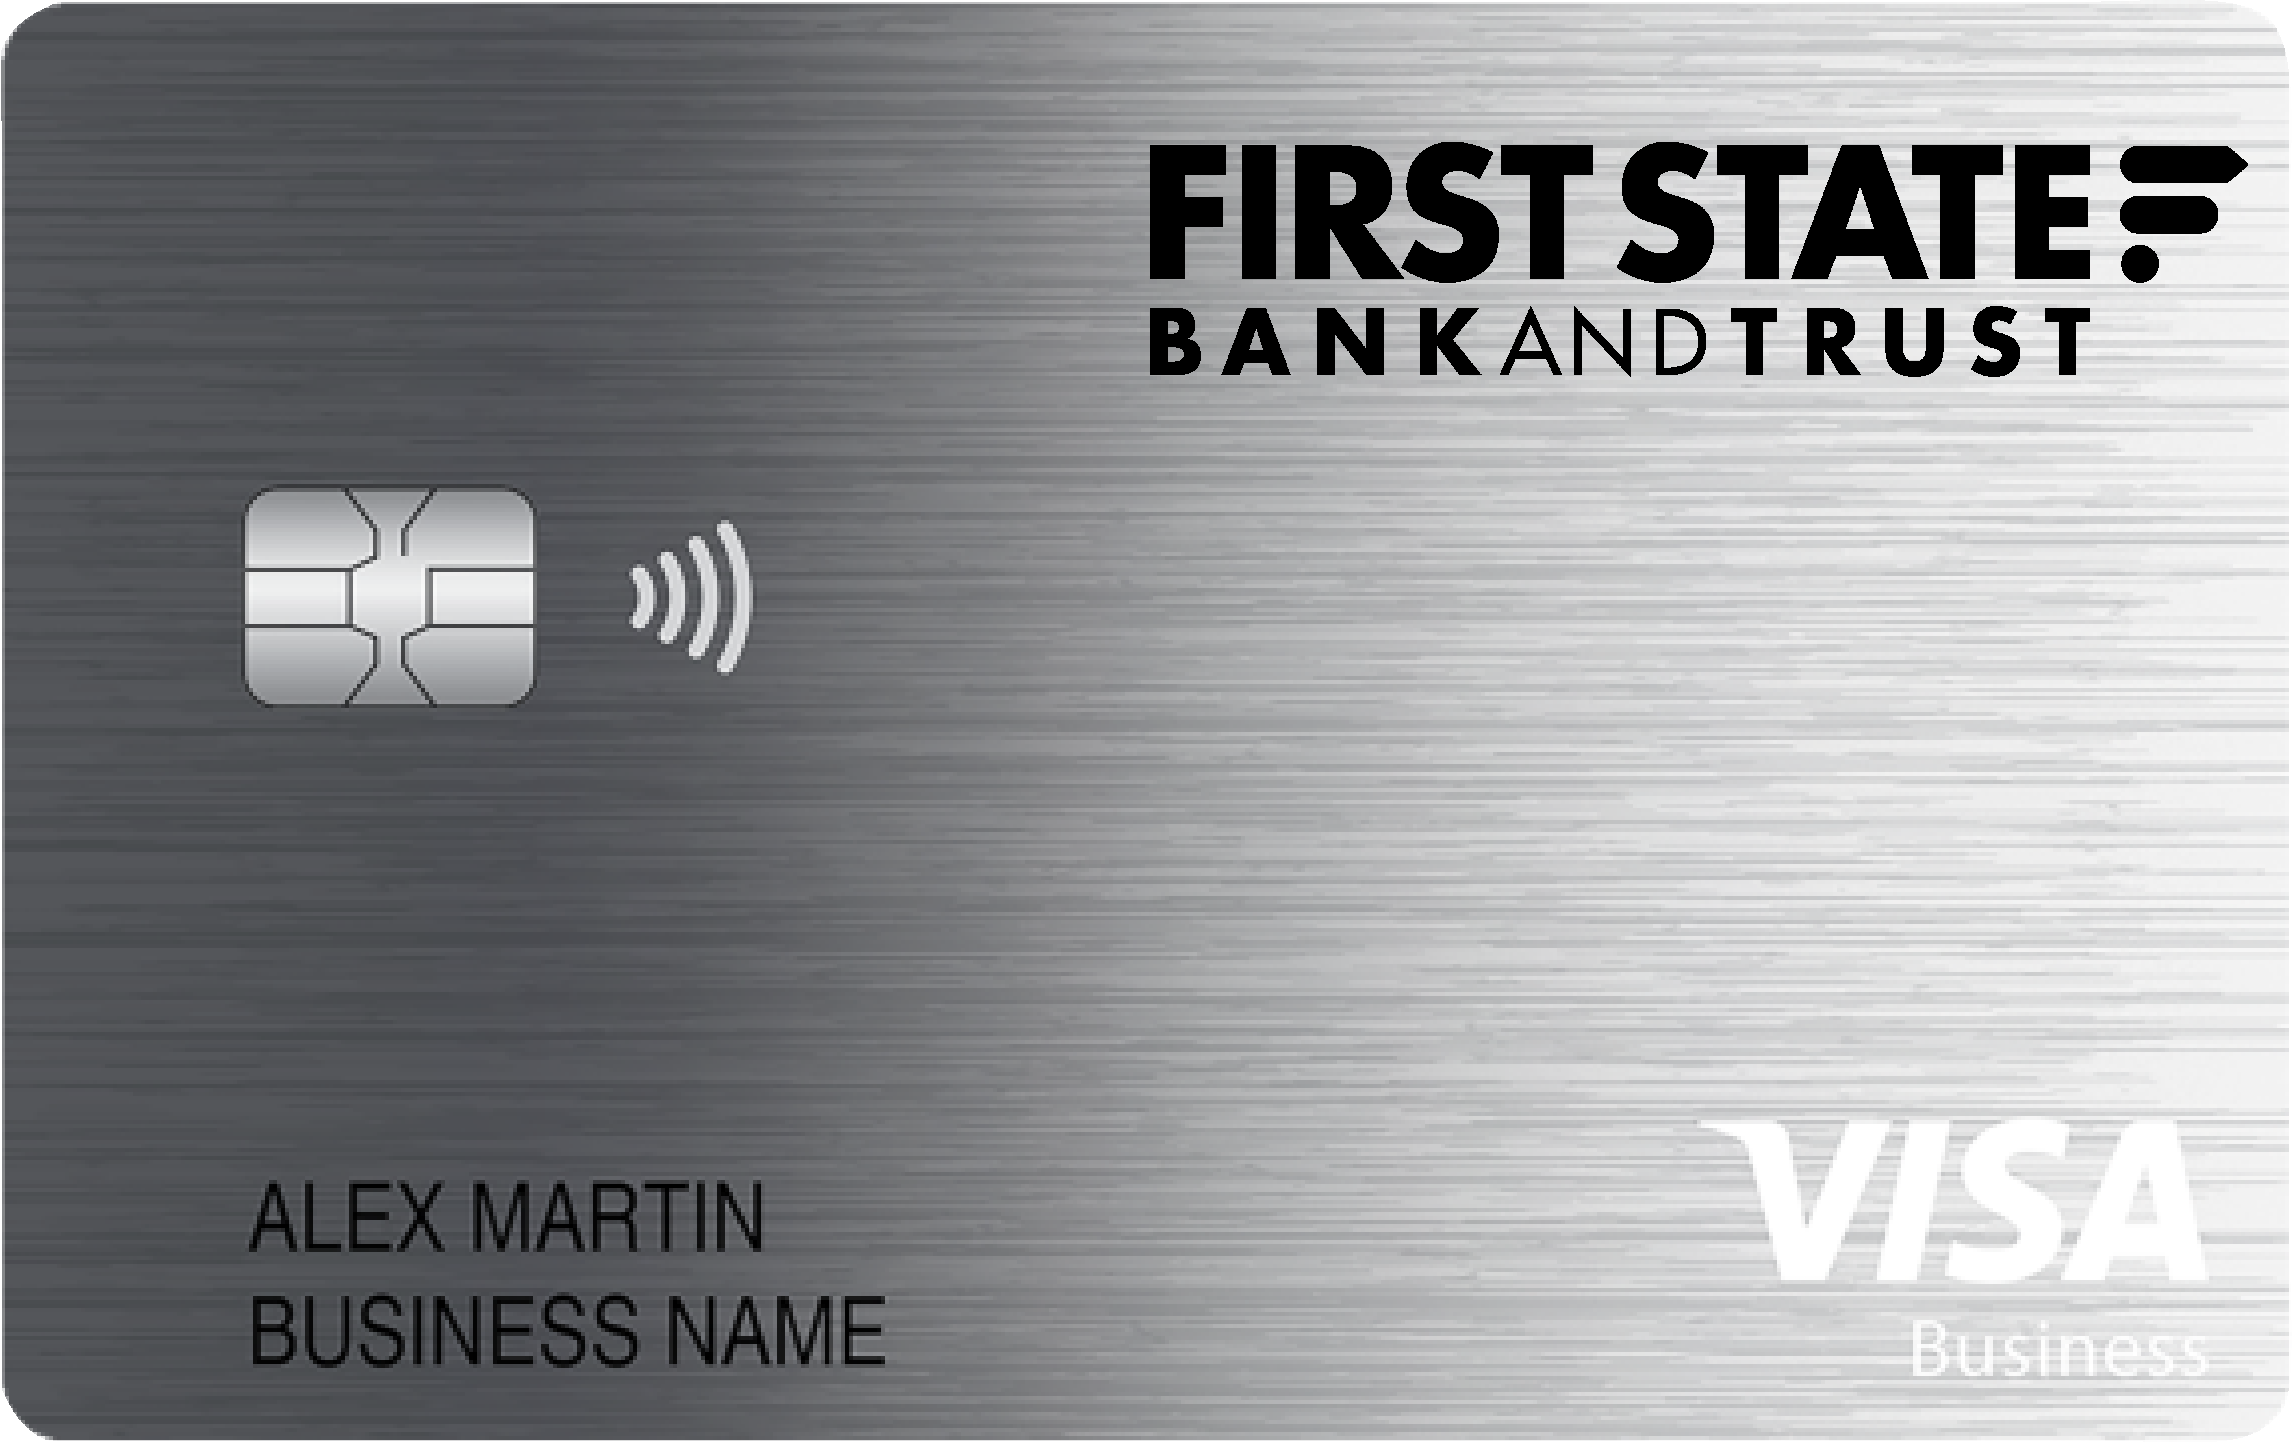 First State Bank and Trust Business Card Card